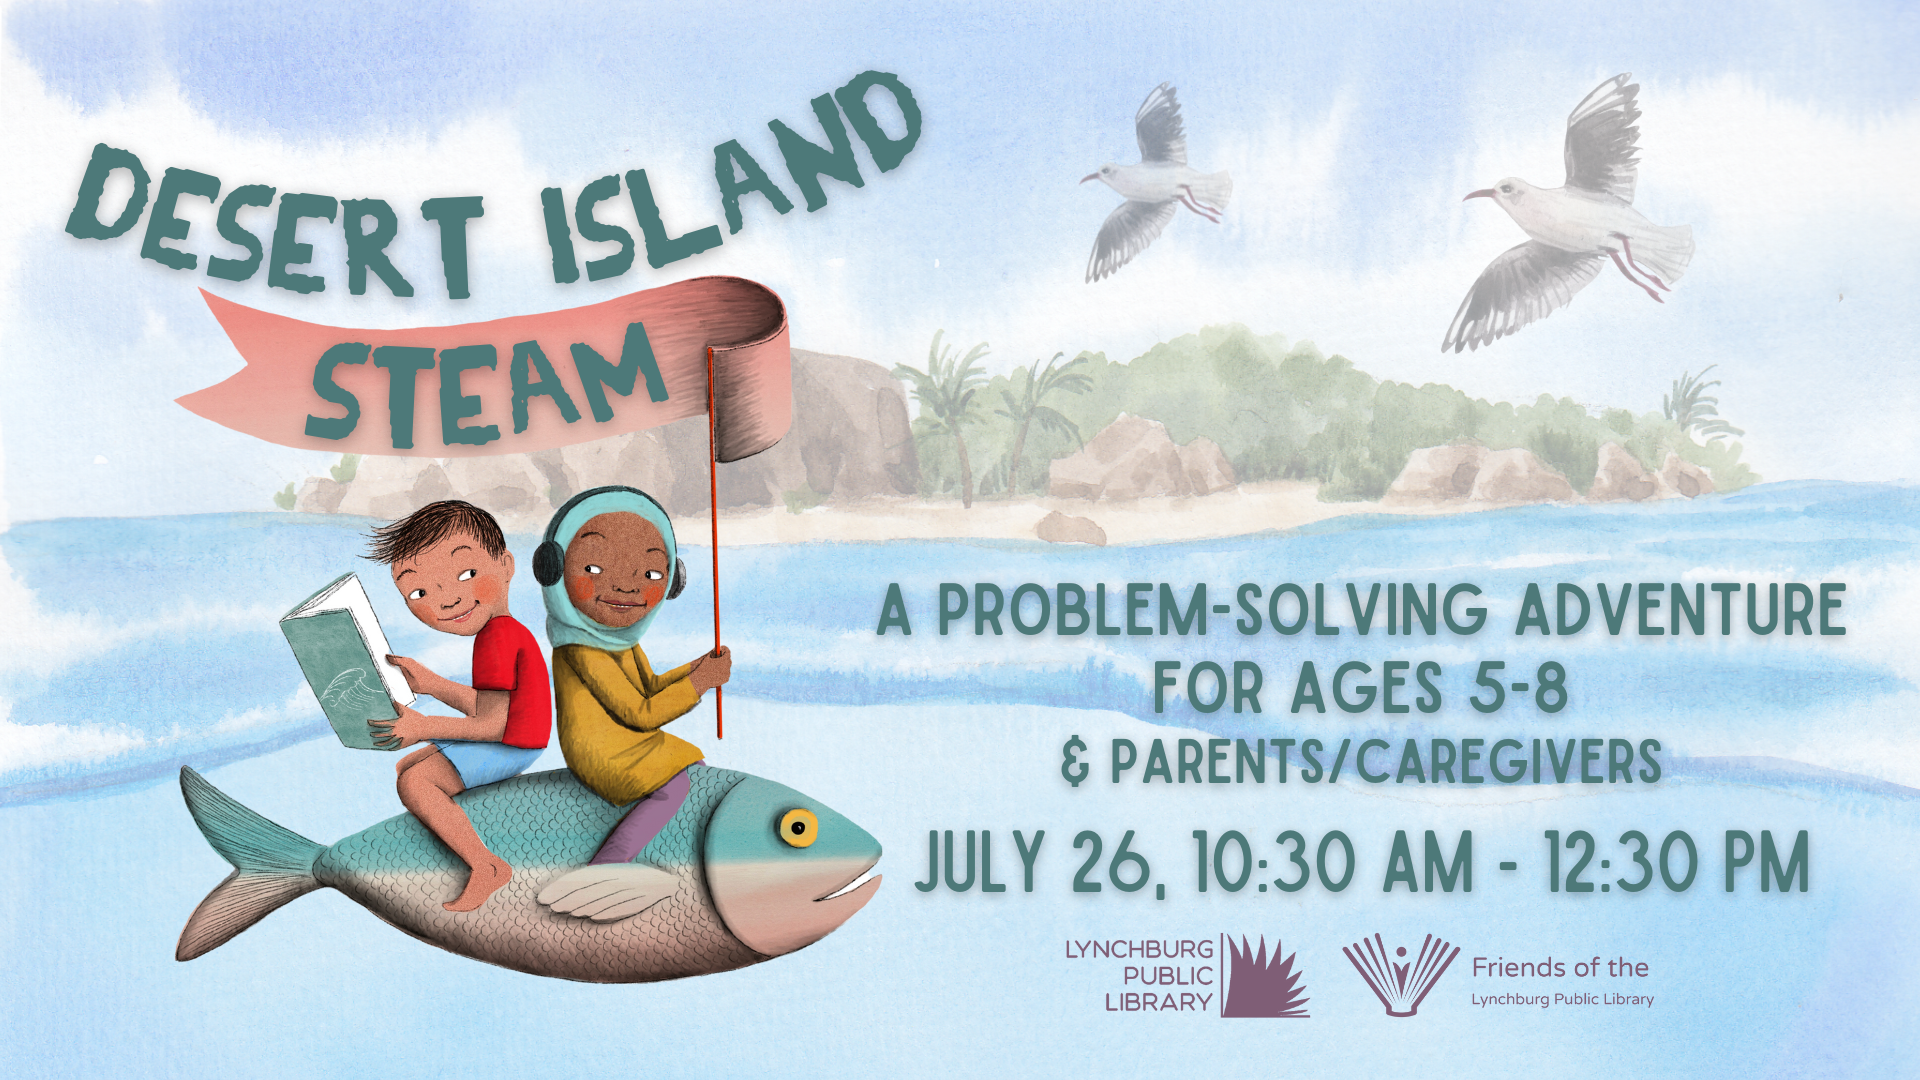 Image features Desert Island STEAM program information as described within this event.